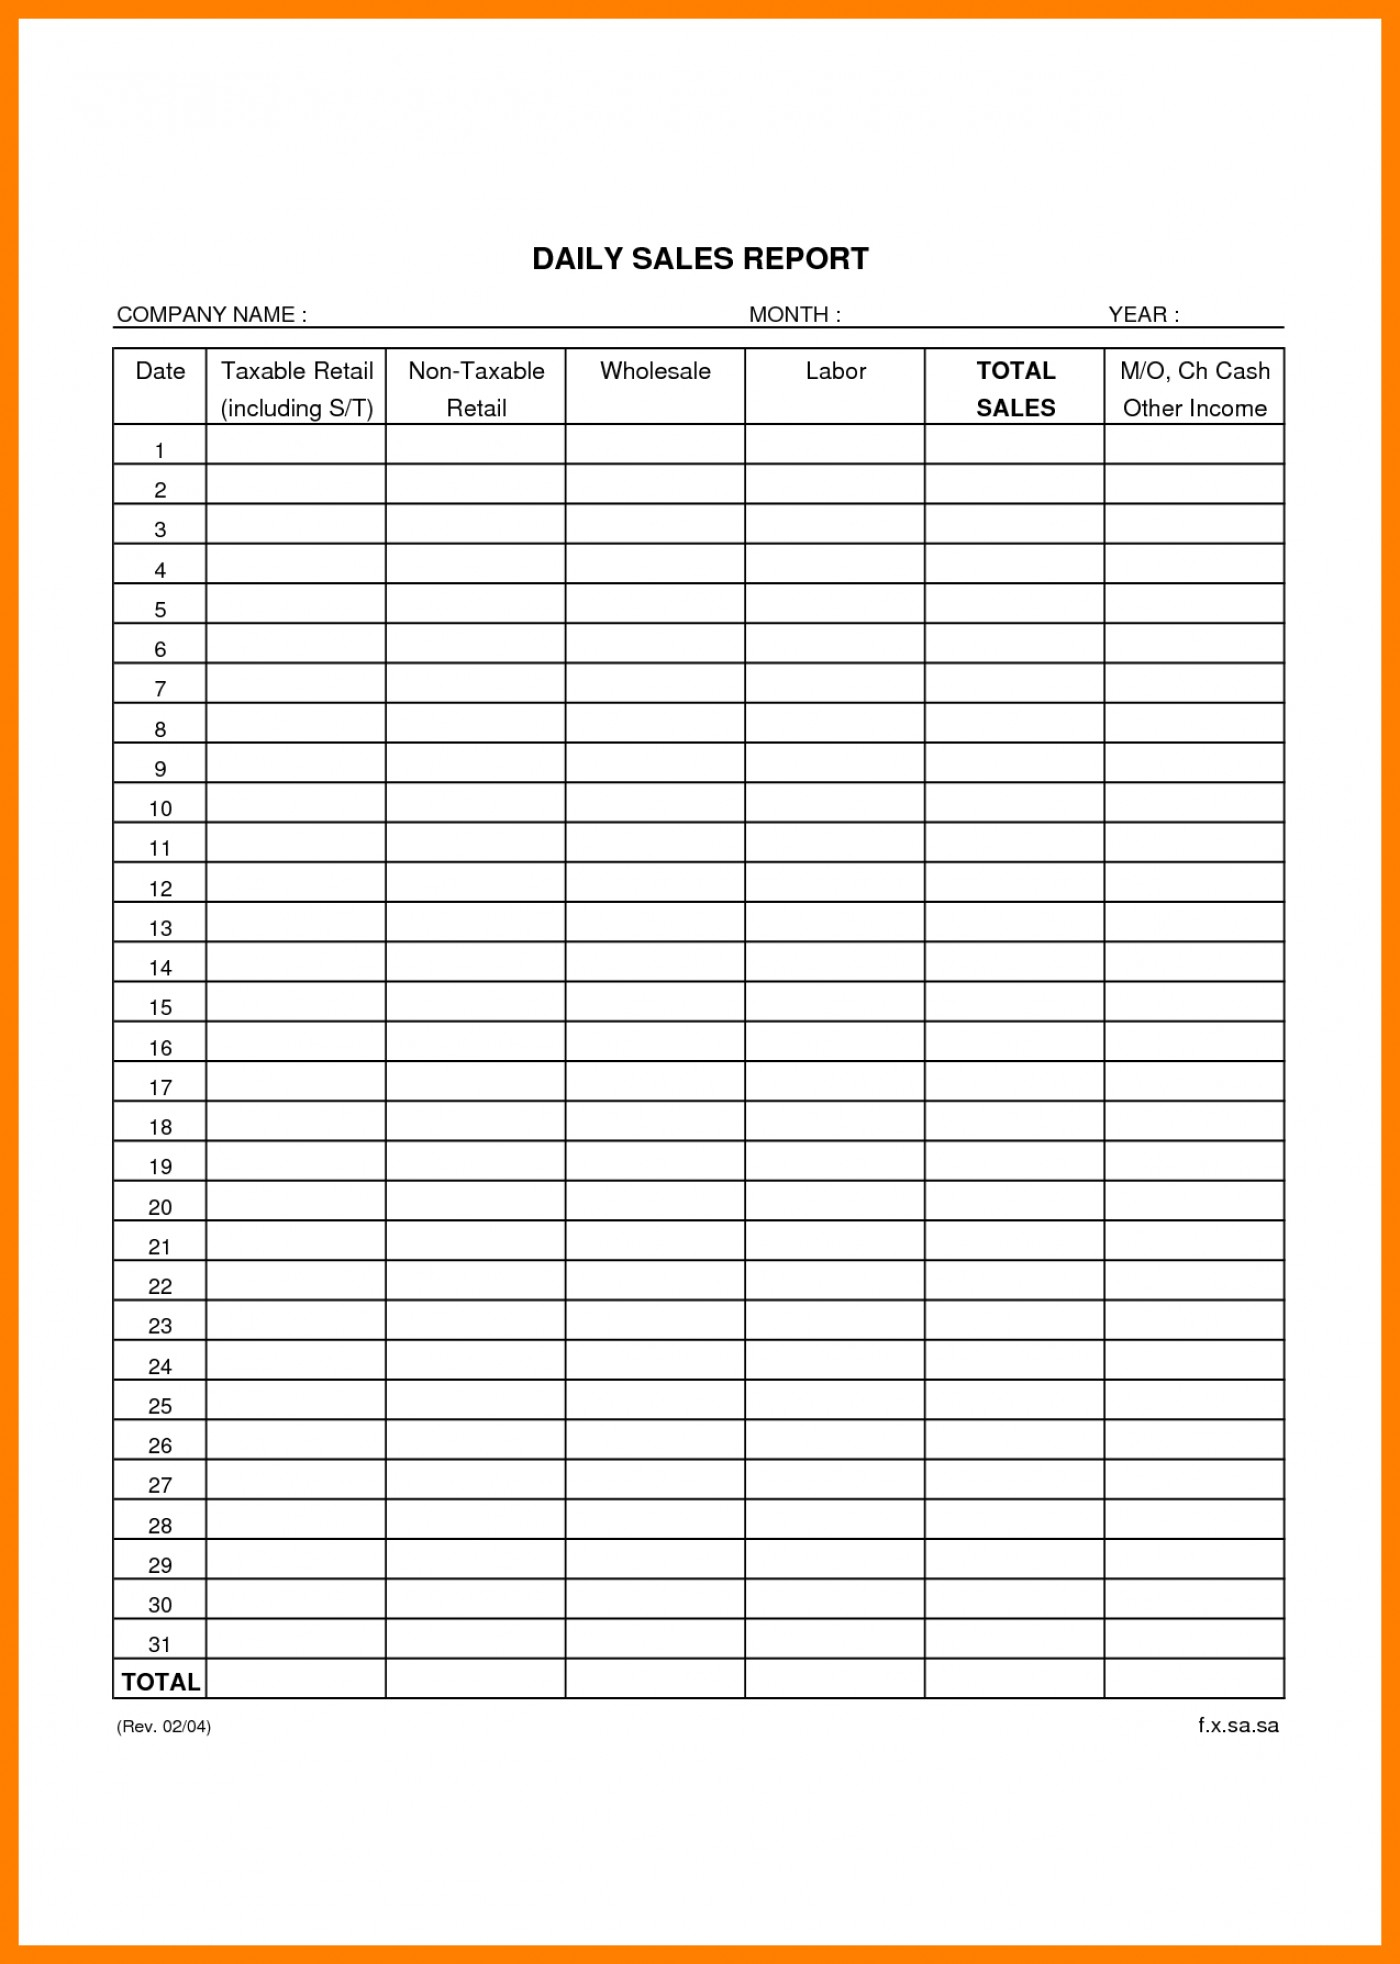 033 Weekly Sales Reports Templates Template Surprising Ideas Inside Free Daily Sales Report Excel Template